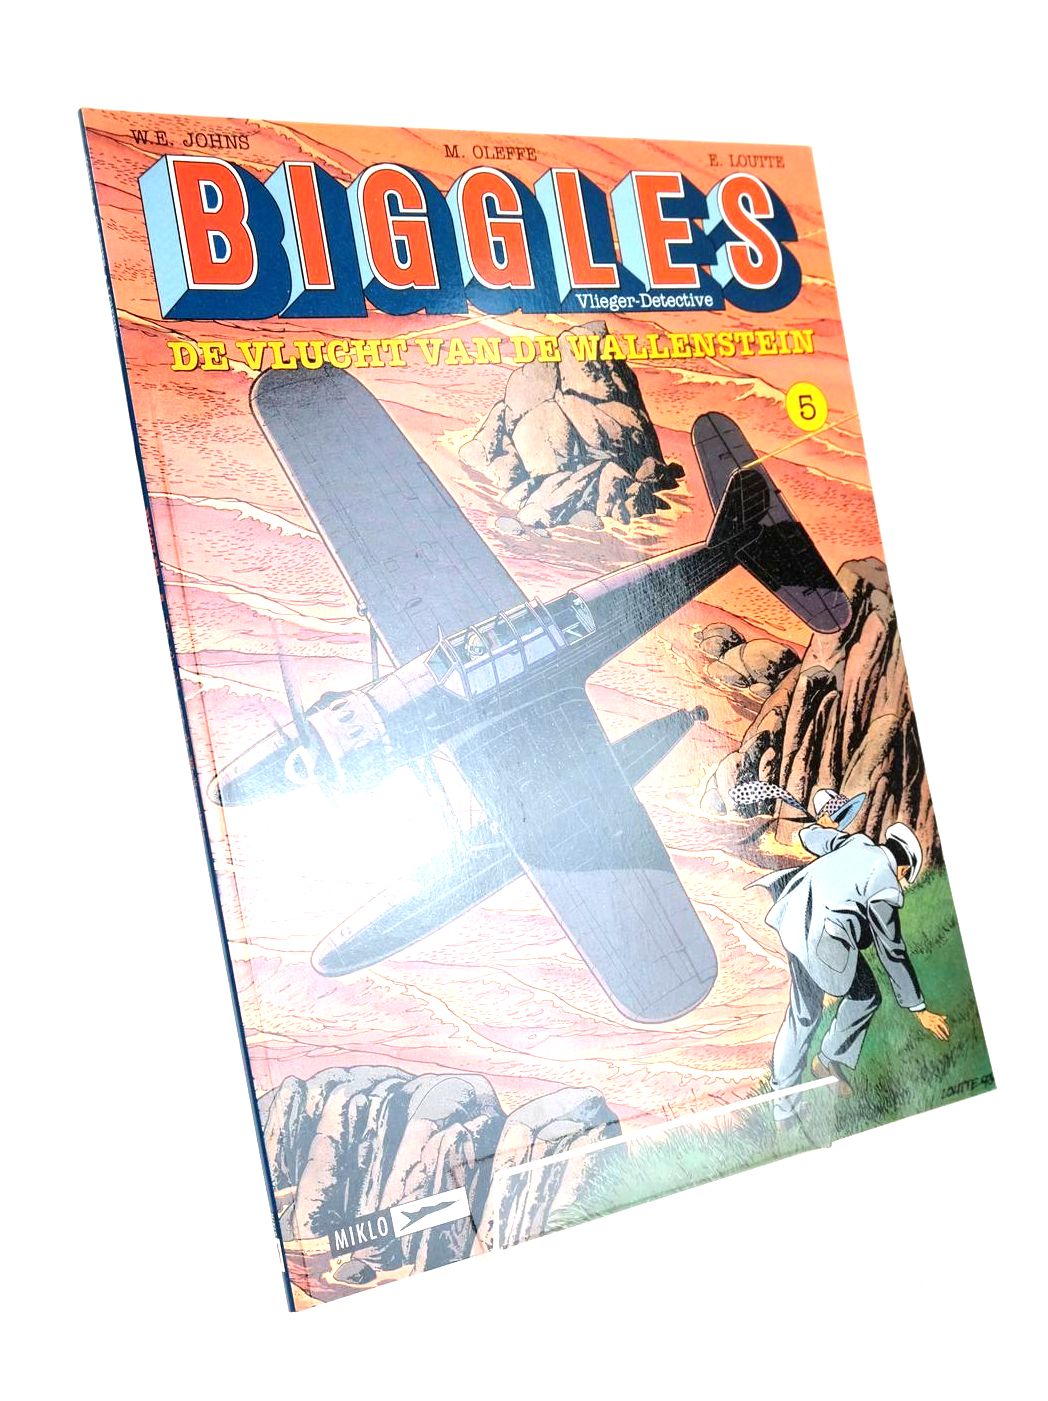 Photo of BIGGLES VLIEGER-DETECTIVE DE VLUCHT VAN DE WALLENSTEIN written by Johns, W.E. Oleffe, Michel illustrated by Loutte, Eric Bergese, Frederic published by Miklo (STOCK CODE: 1326339)  for sale by Stella & Rose's Books